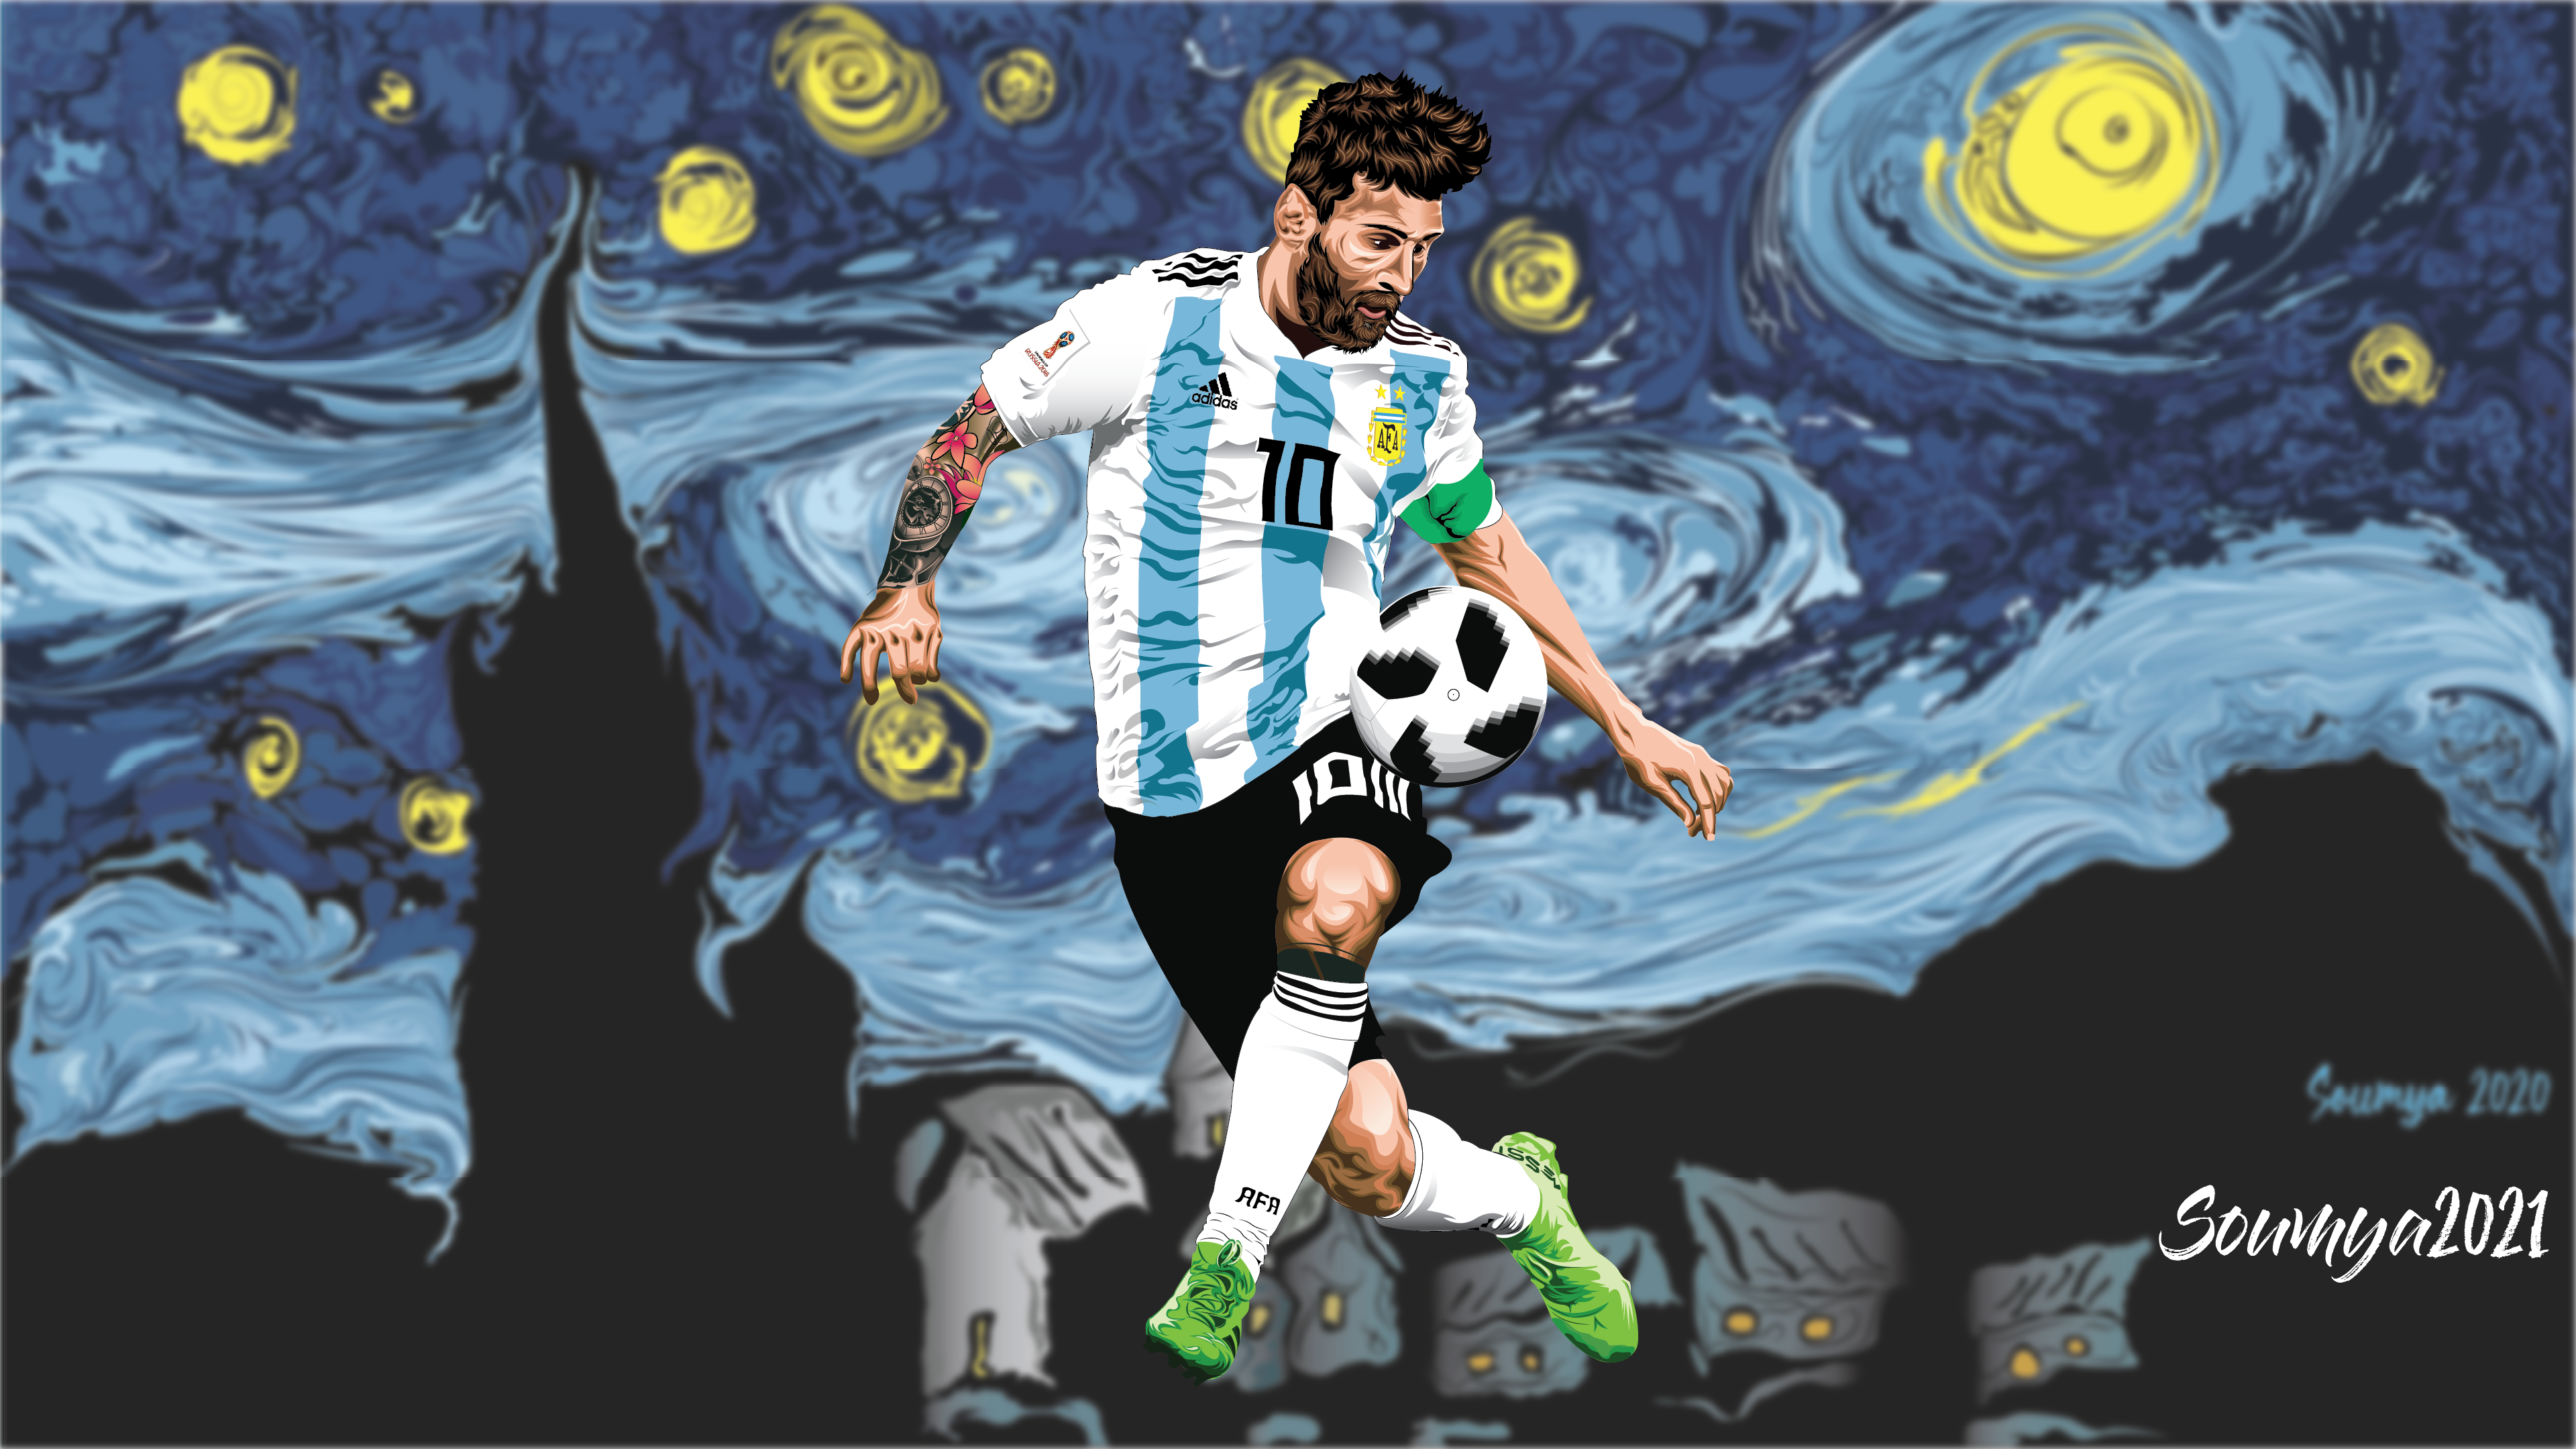 LIONEL MESSI x Starry night by IND_s0uL_141